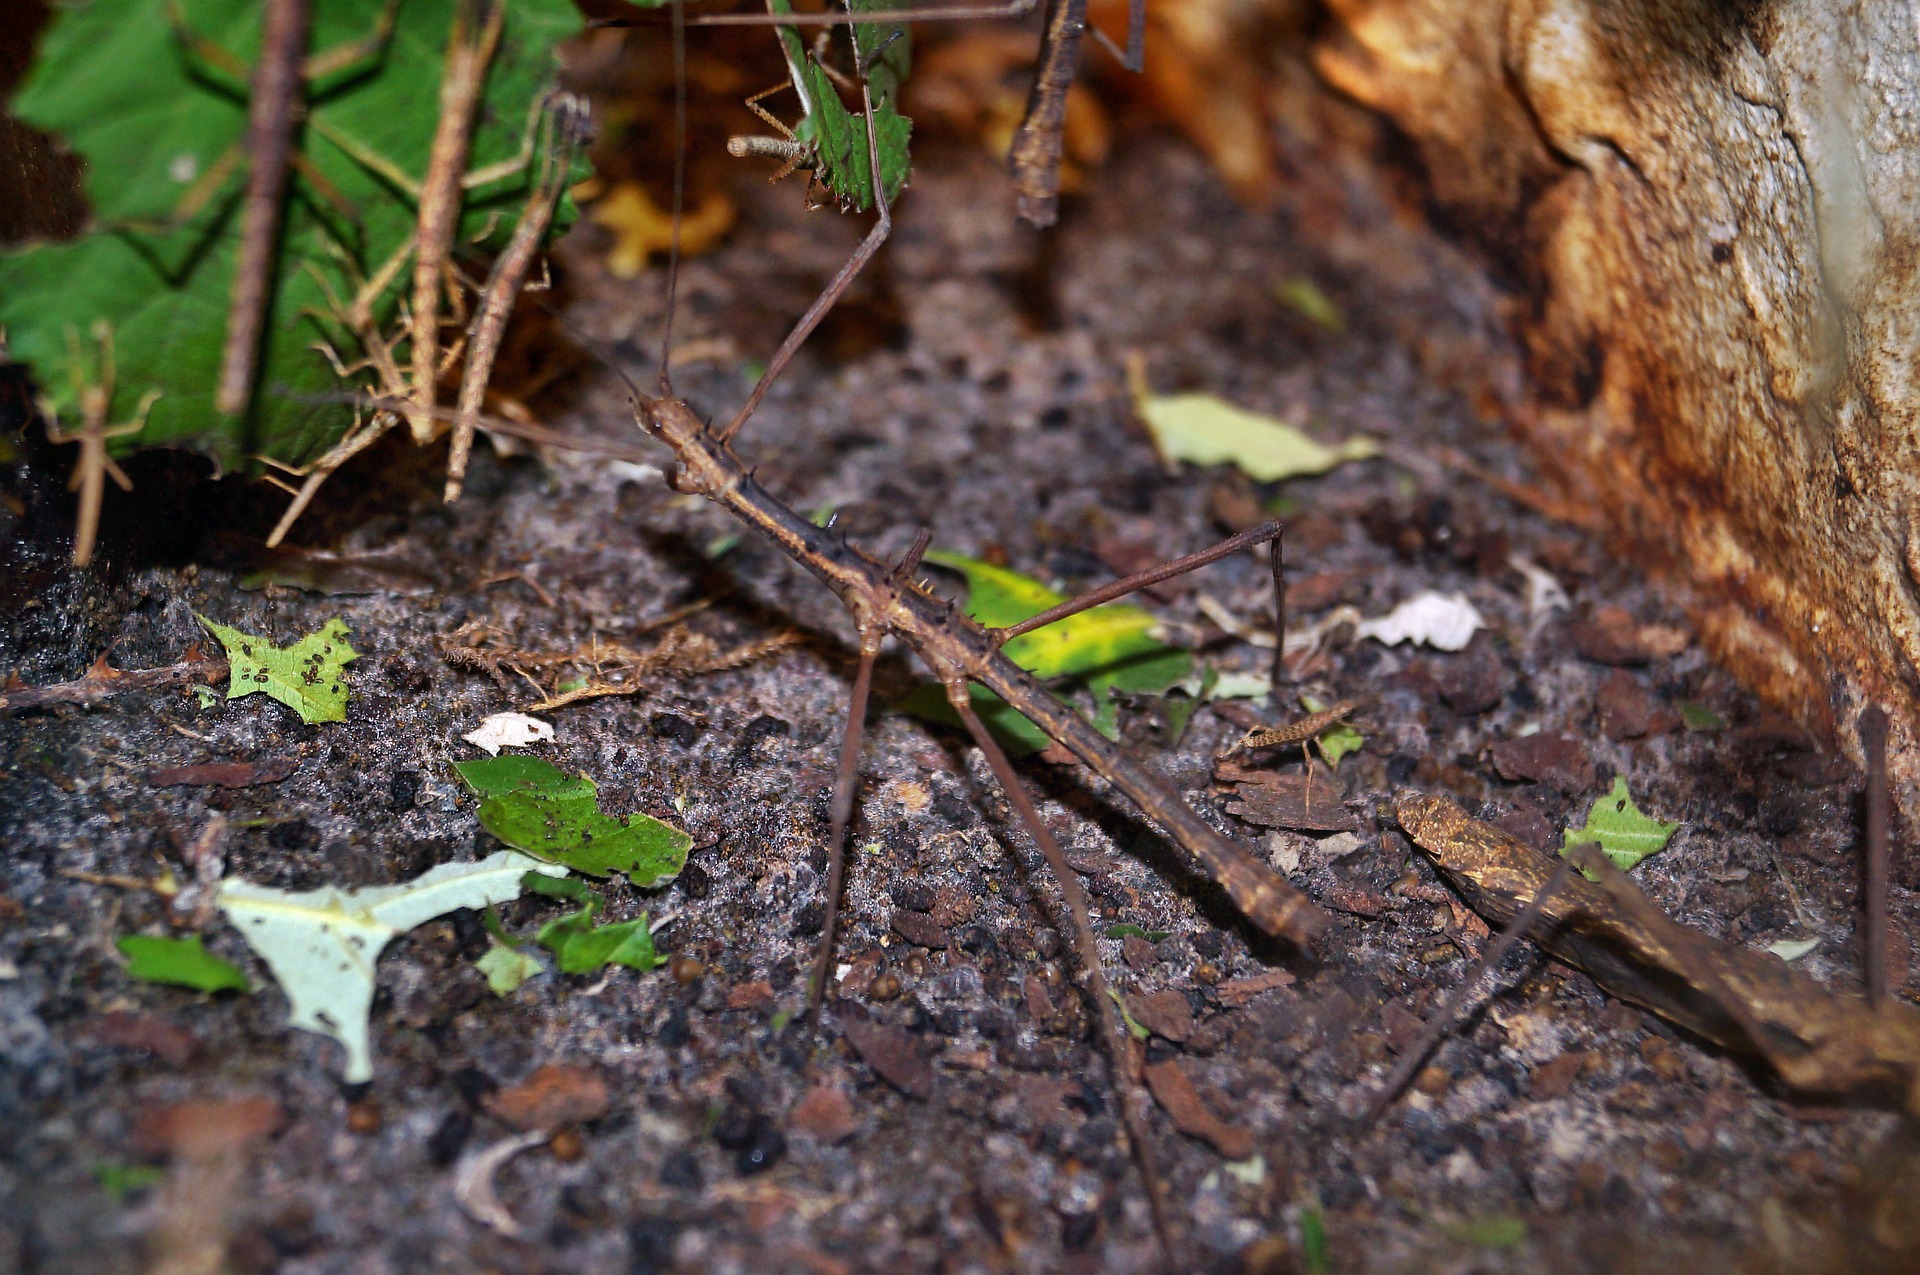 stick-insect-336361_1920.jpg